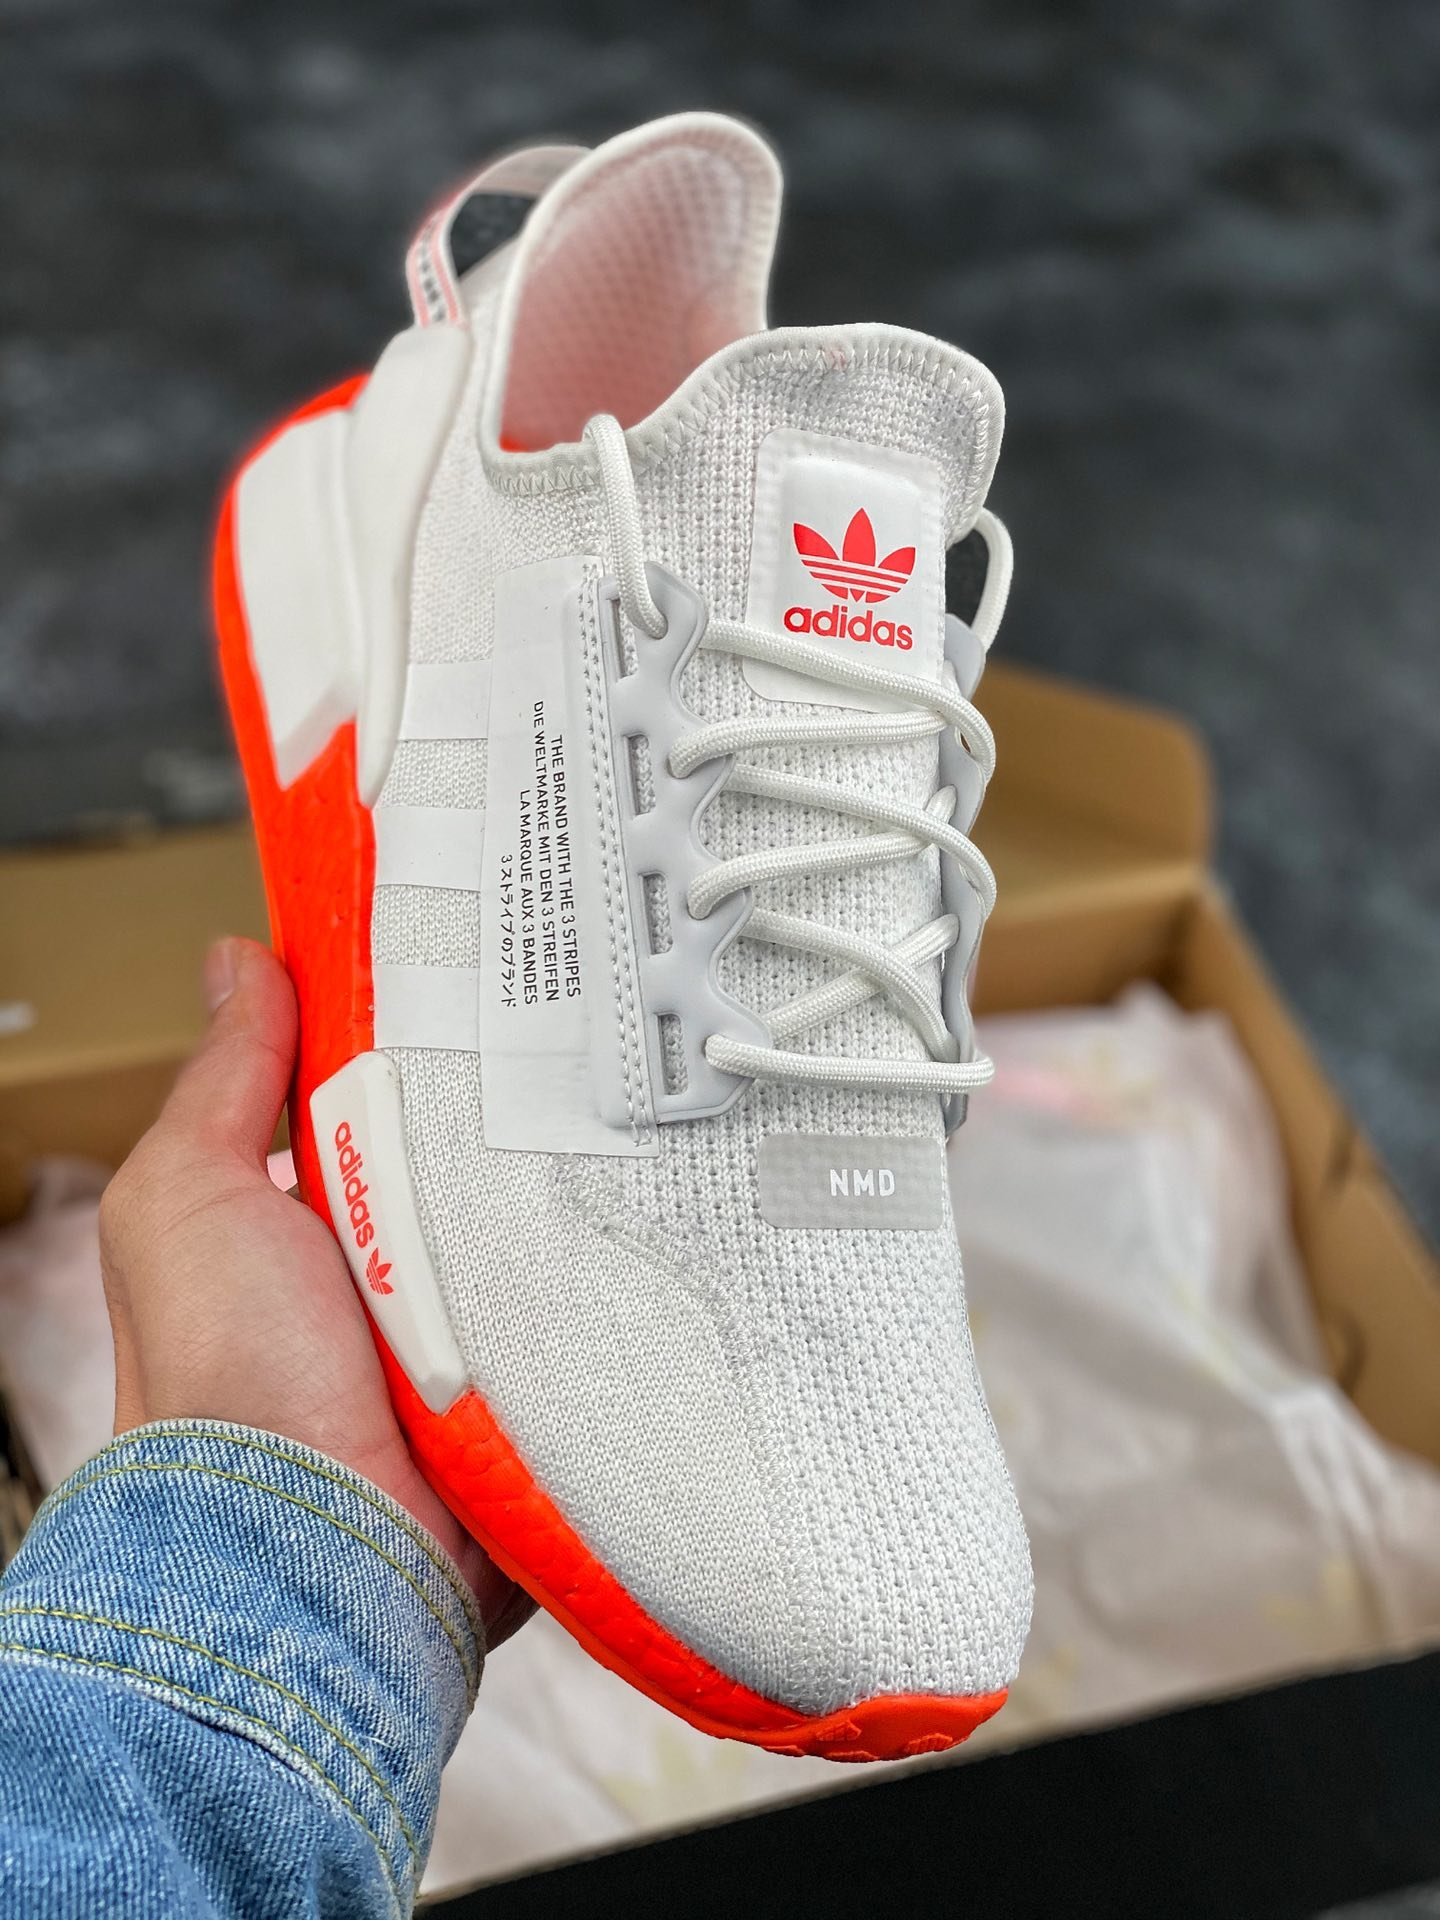 adidas nmd r1 Offer Recommendations 2020 Months Shrimp Skin Shopping Taiwan